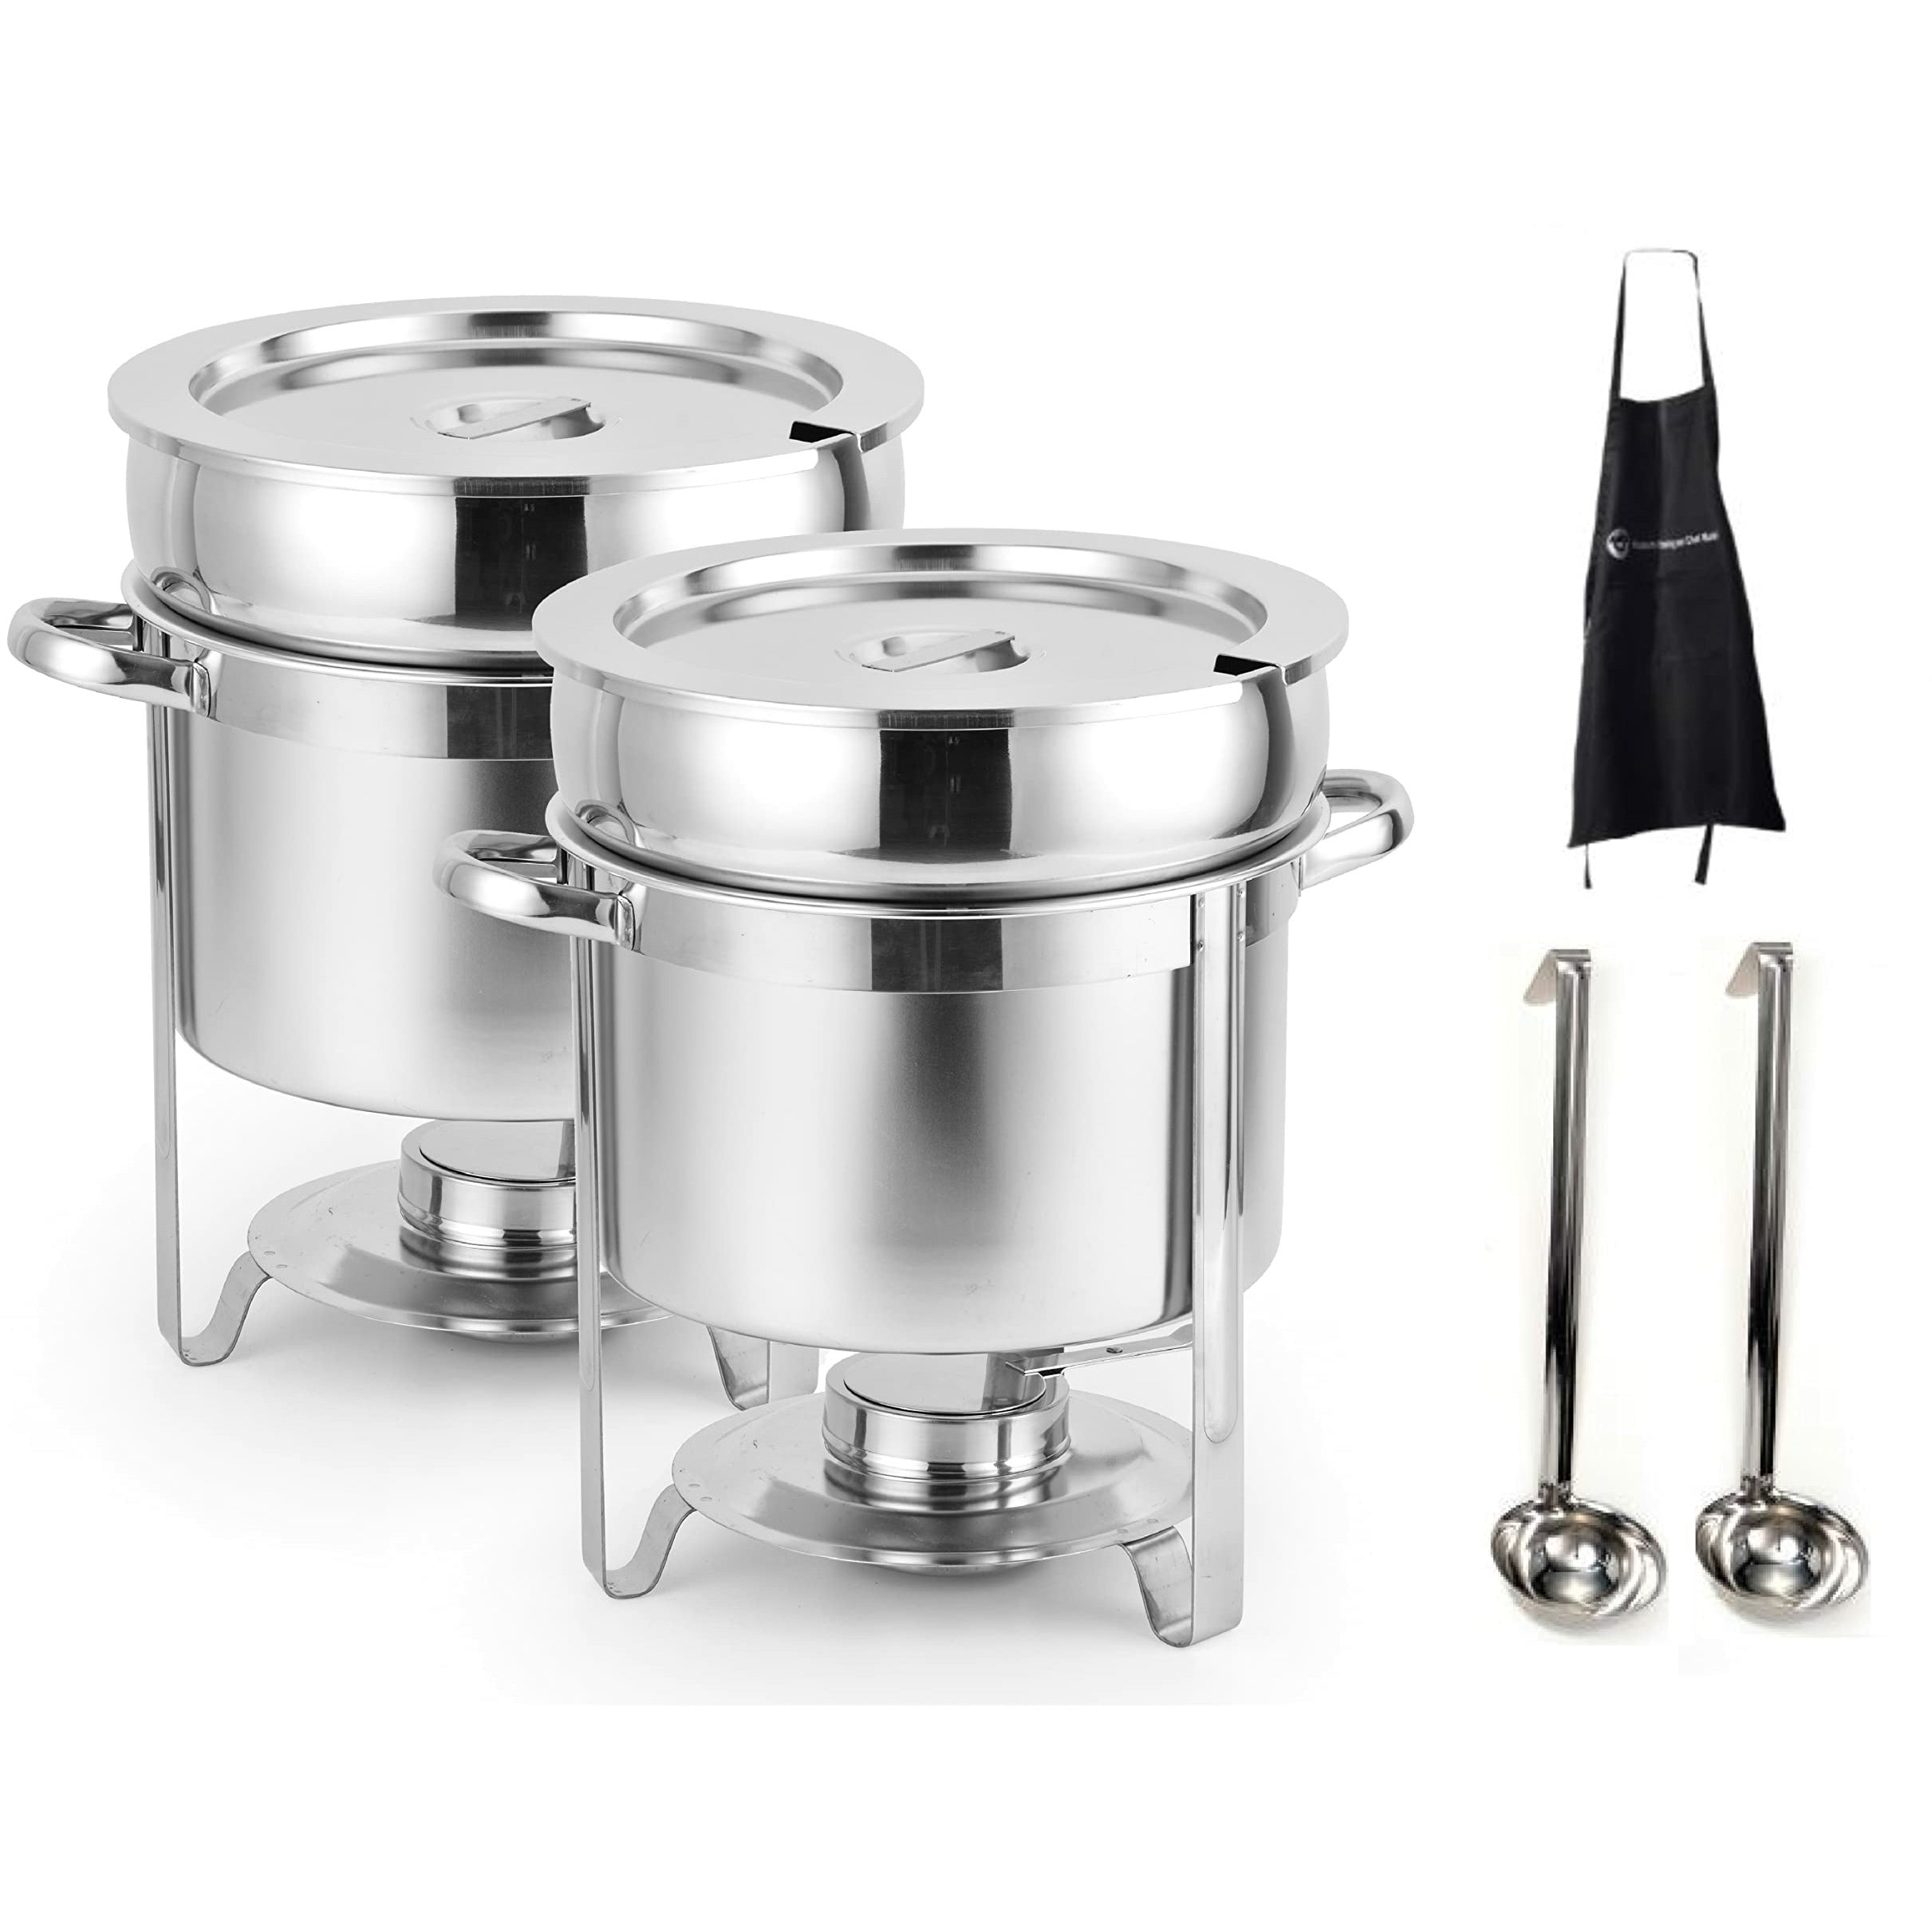 Soup Chafer Marmite Chafer Stainless Steel Buffet Set Warmer for Any Event or Party 7 Quart 2-PACK